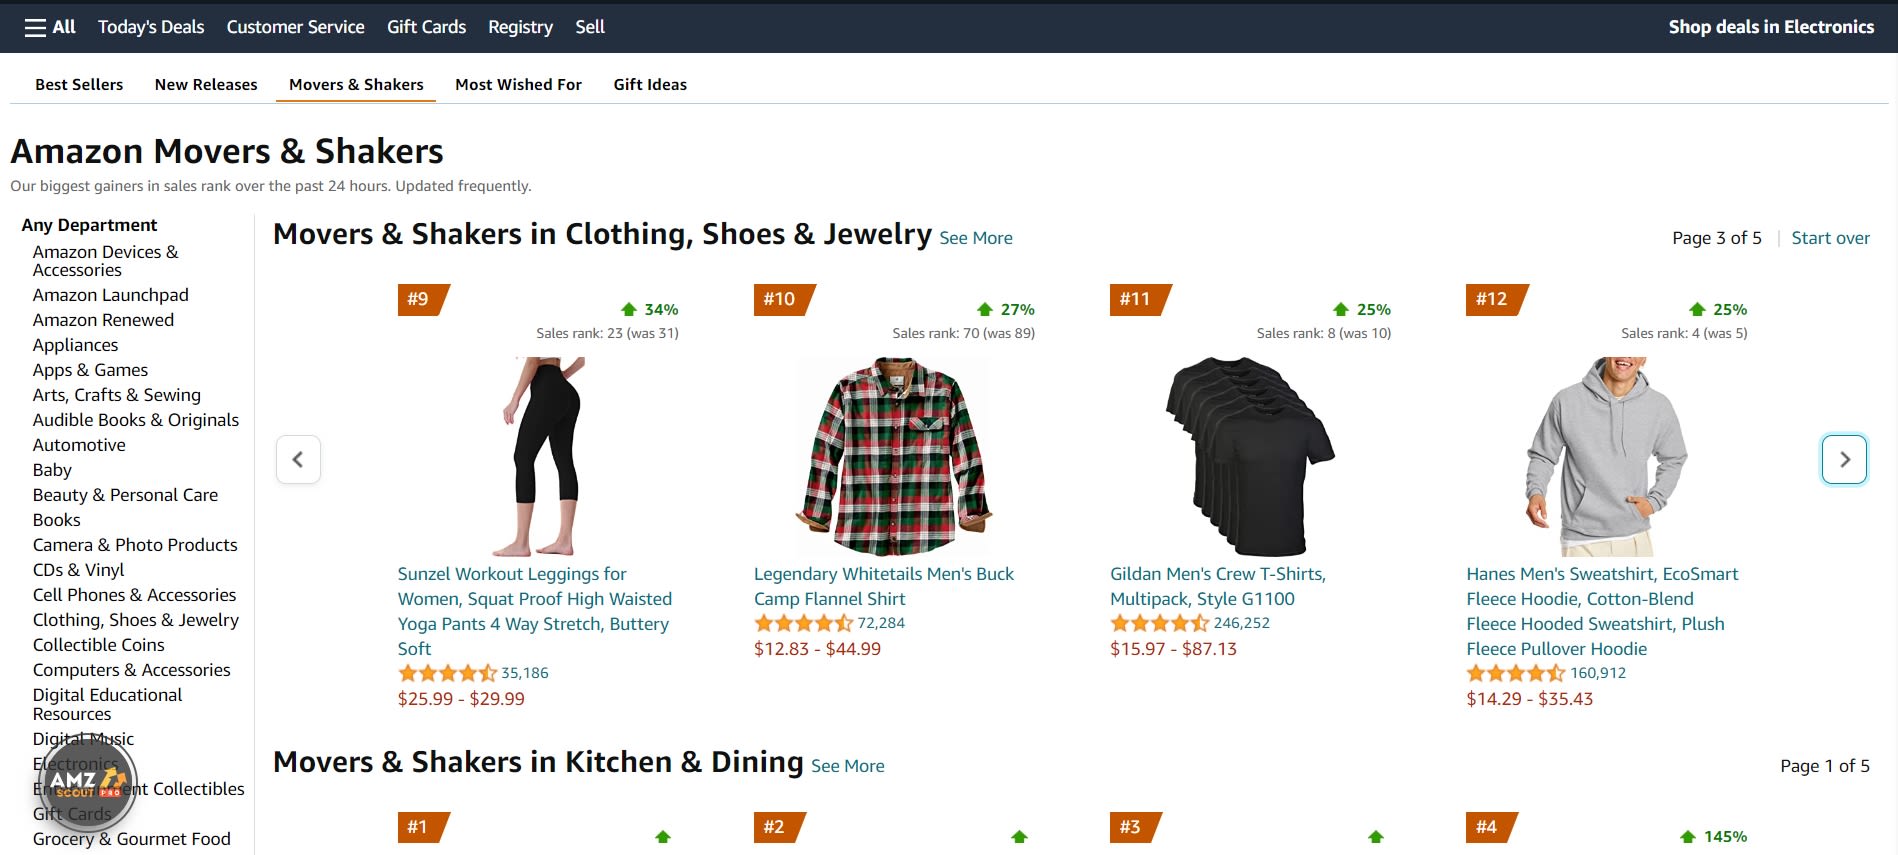 Where to find the Amazon Movers & Shakers category